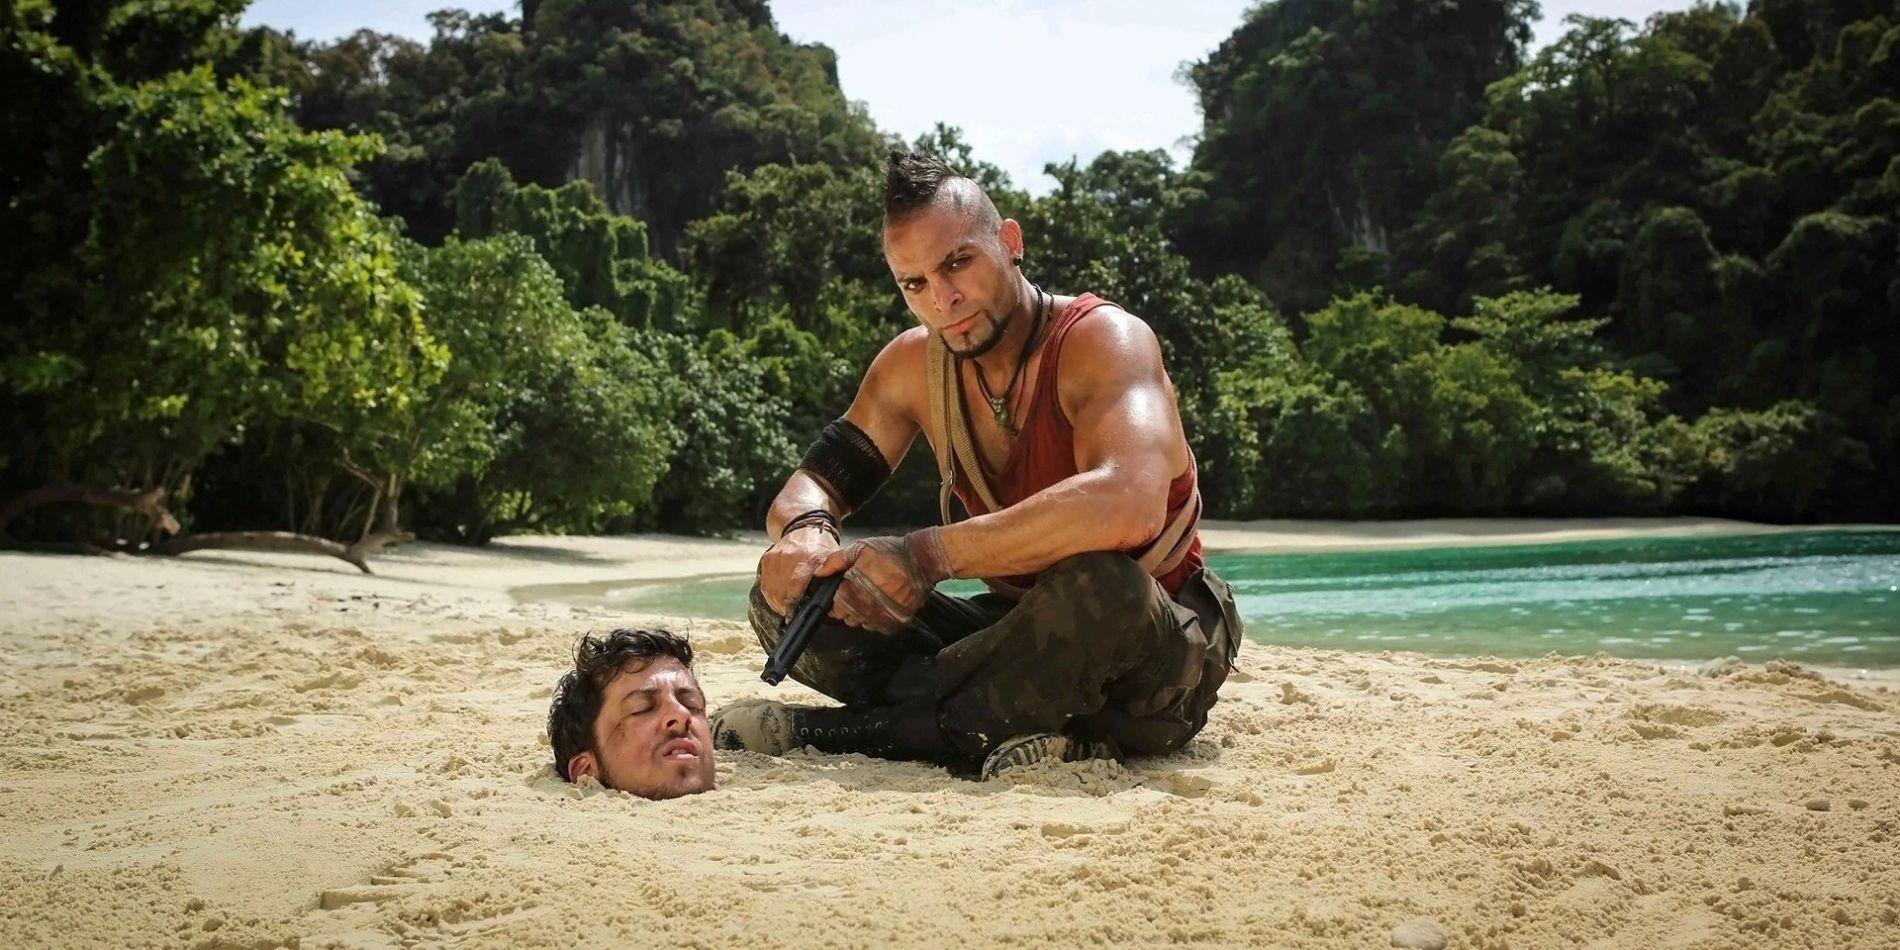 Vaas Montenegro, played by Michael Mando, sits on a beach with Christopher Mintz-Plasse buried up to his chin in the sand